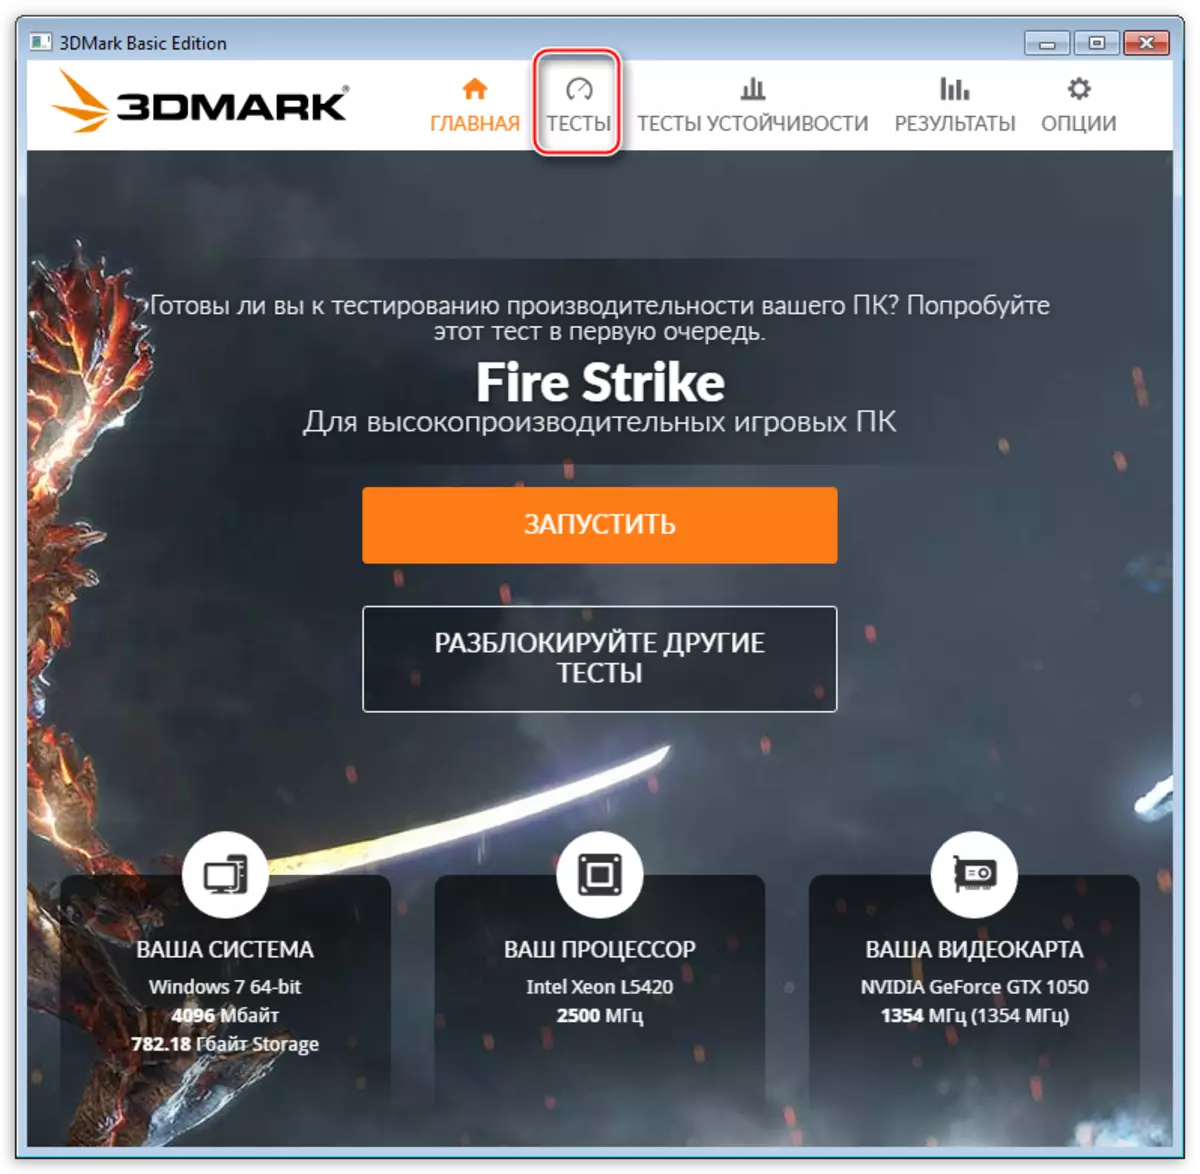 Menu selection tests in the main window of the benchmark by Futuremark 3DMark